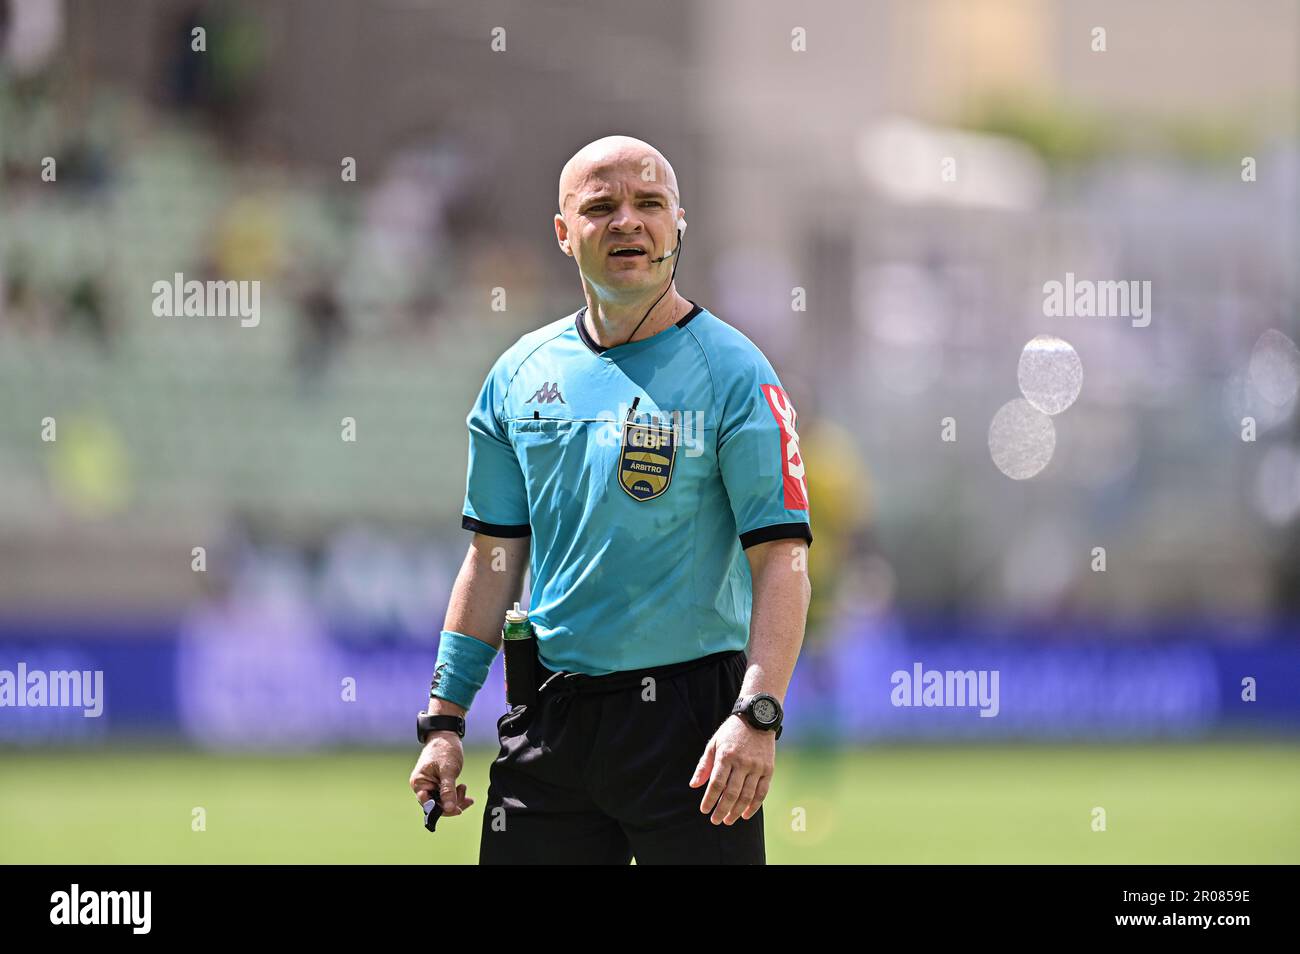 Belo Horizonte, Brazil. 07th May, 2023. Arena Independencia Referee Denis da Silva Ribeiro Serafim, during the match between America Mineiro and Cuiaba, for the 4th round of the Brazilian championship, at Arena Independencia, this Sunday 07. 30761 (Gledston Tavares/SPP) Credit: SPP Sport Press Photo. /Alamy Live News Stock Photo